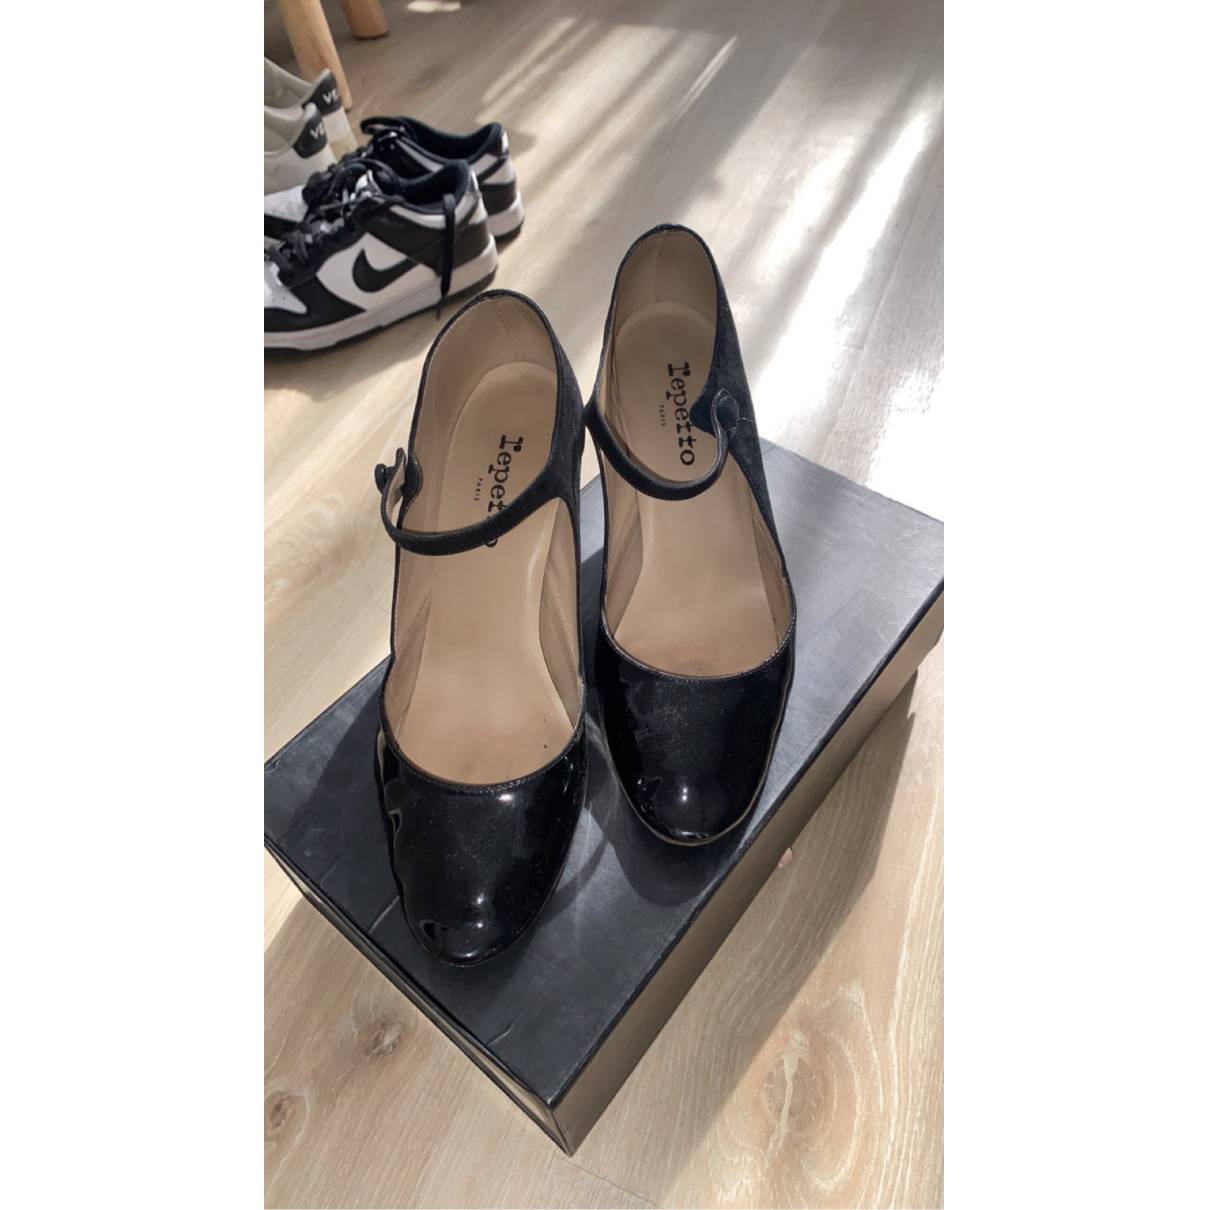 Leather heels Repetto Black size 39.5 EU in Leather - 34156389